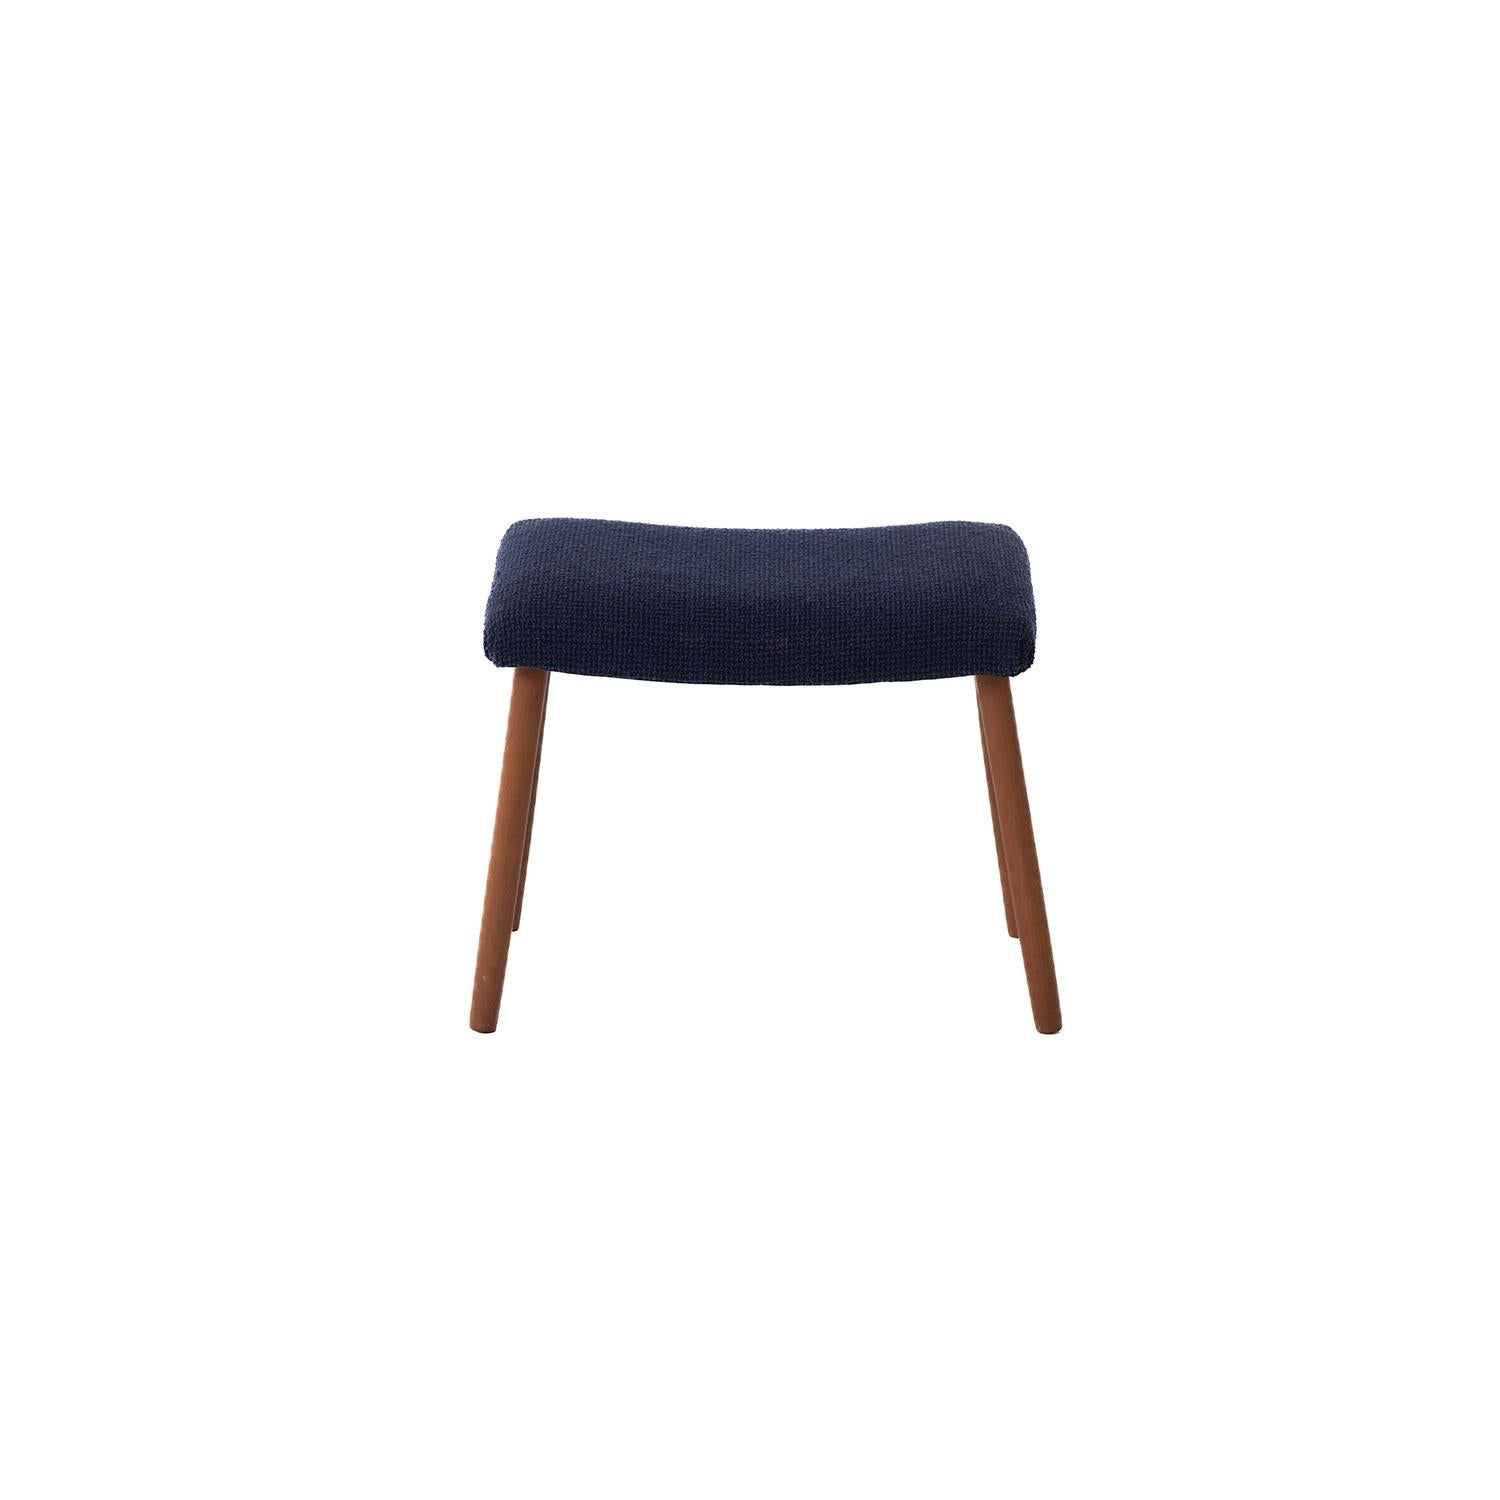 Danish modern footstool with beech legs and newly upholstered in a blue boucle wool. 


Professional, skilled furniture restoration is an integral part of what we do every day. Our goal is to provide beautiful, functional furniture that honors its